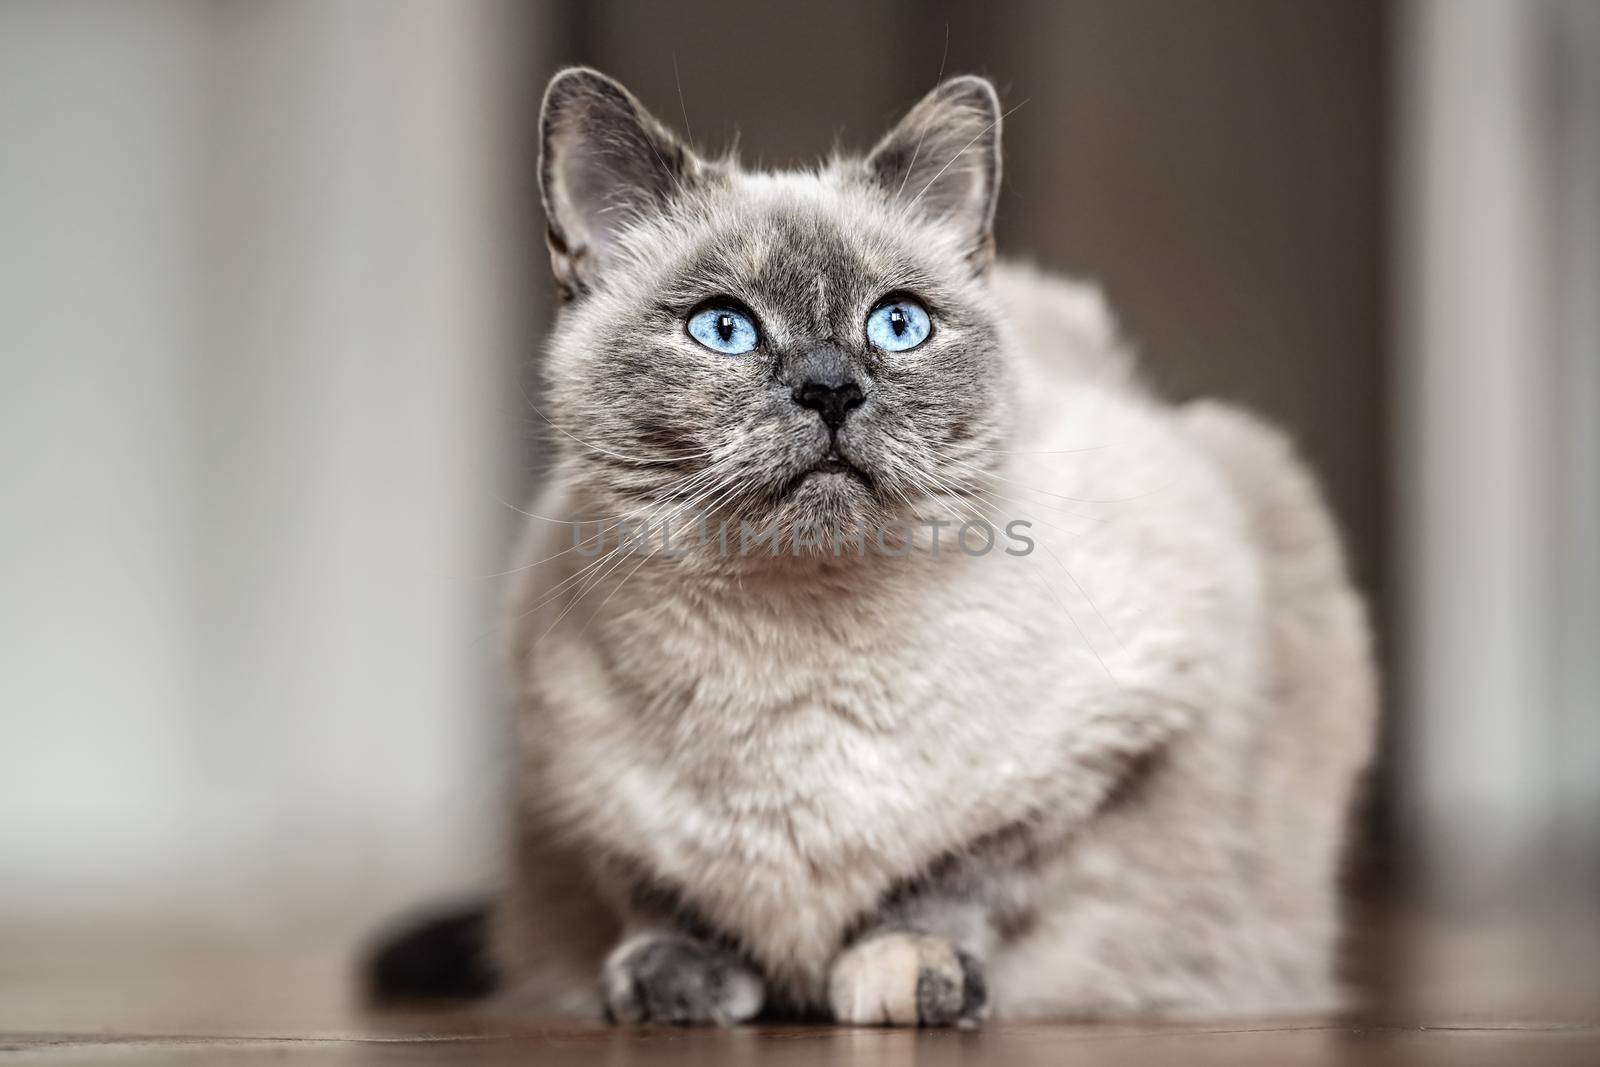 Older gray cat with piercing blue eyes, laying on wooden floor, closeup shallow depth of field photo.